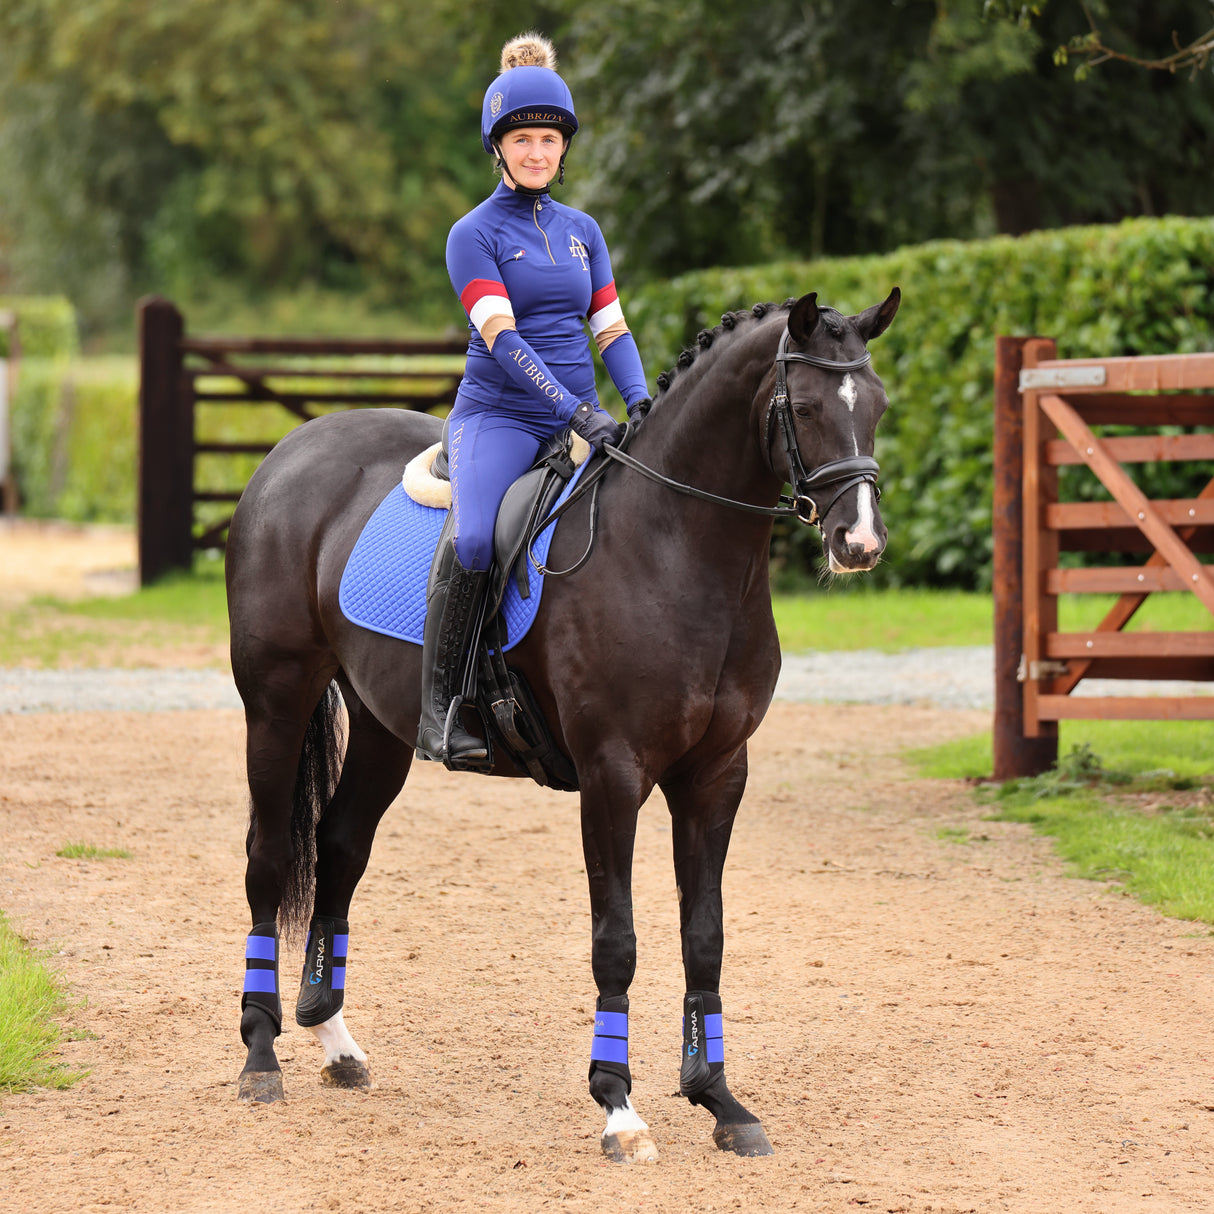 Shires Aubrion Team Long Sleeve Ladies Base Layer #colour_navy